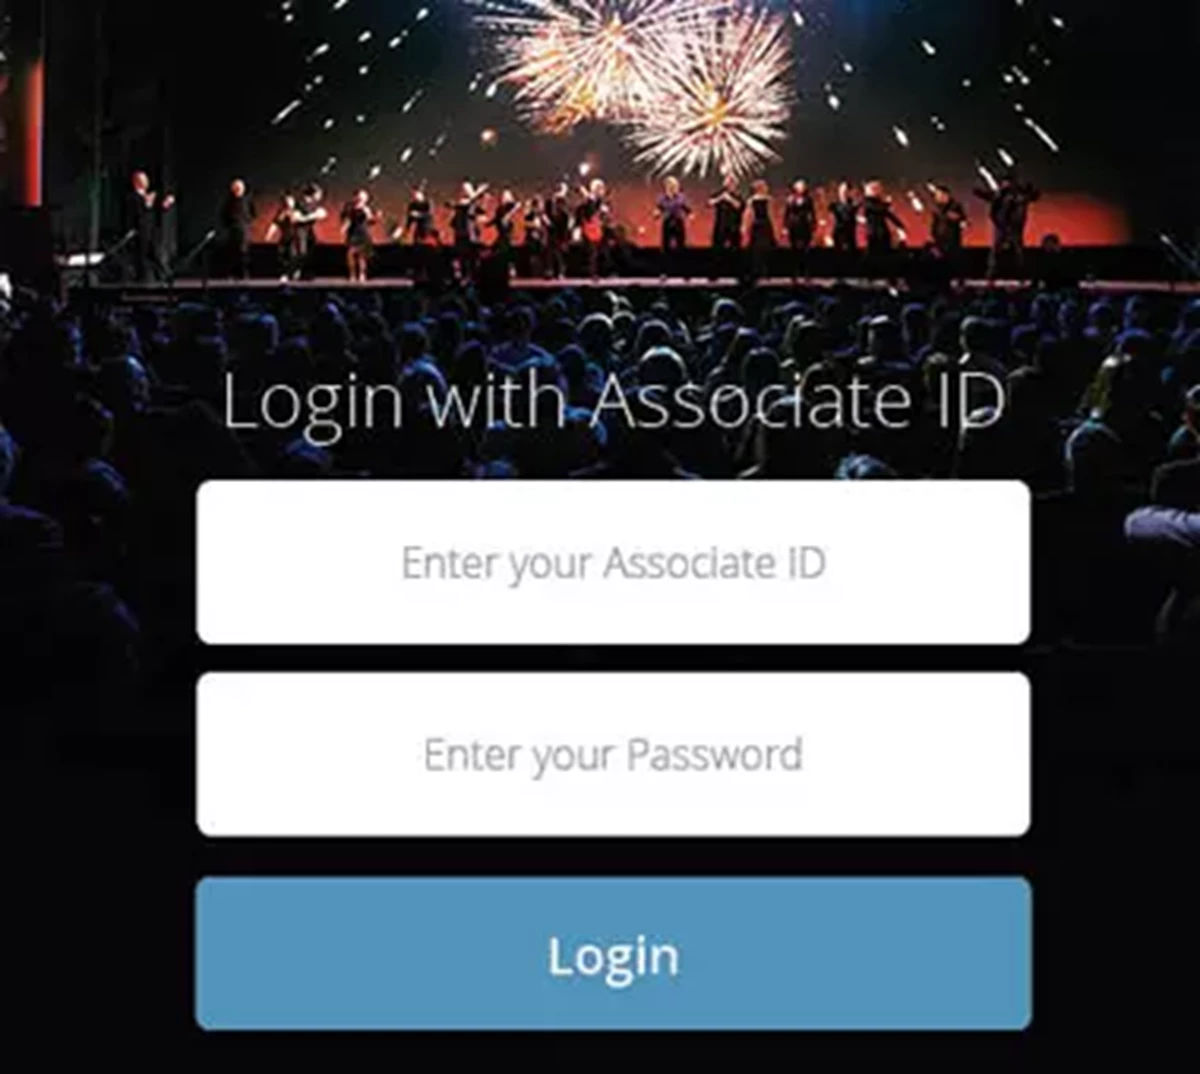 Login with Associate ID screen for mobile devices.